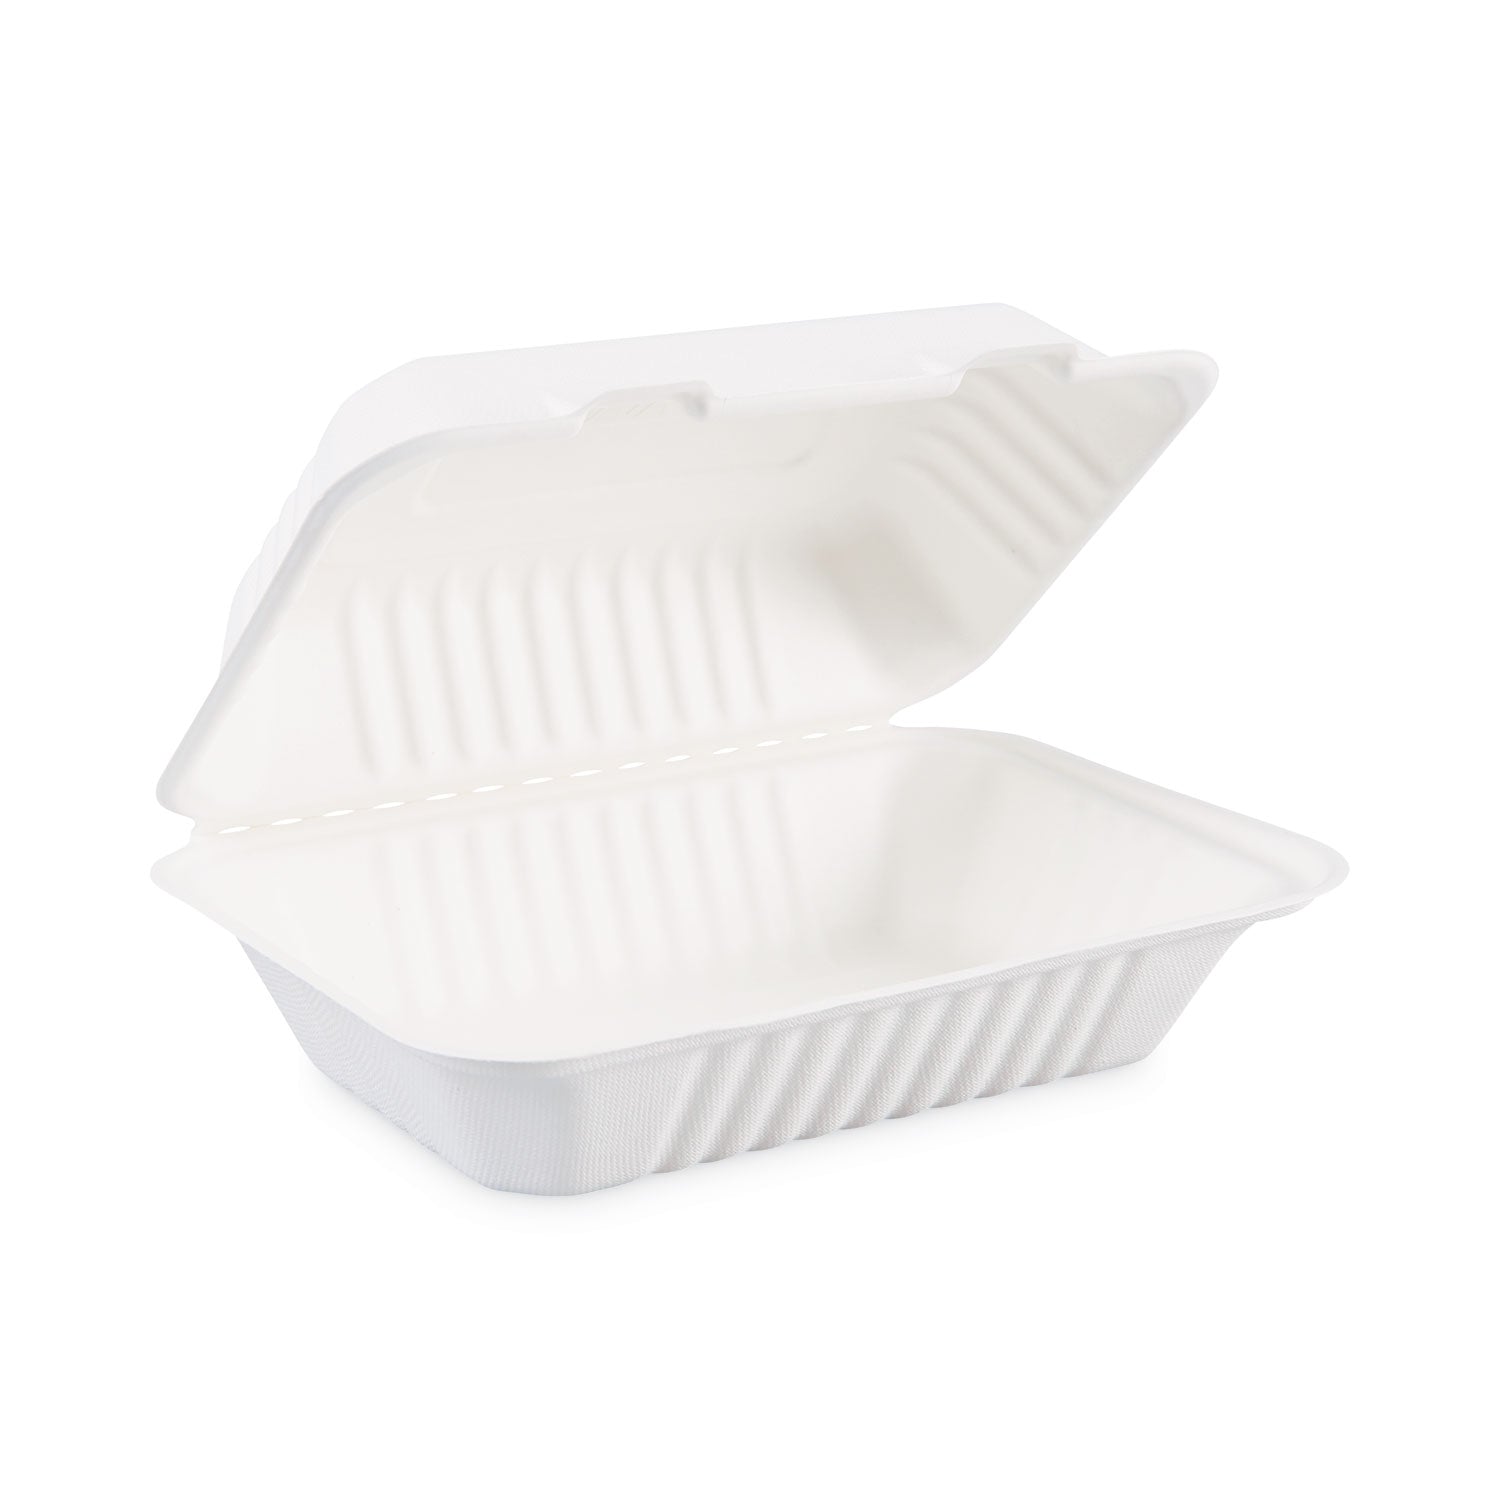 bagasse-food-containers-hinged-lid-1-compartment-9-x-6-x-319-white-sugarcane-125-sleeve-2-sleeves-carton_bwkhingewfhg1c9 - 1